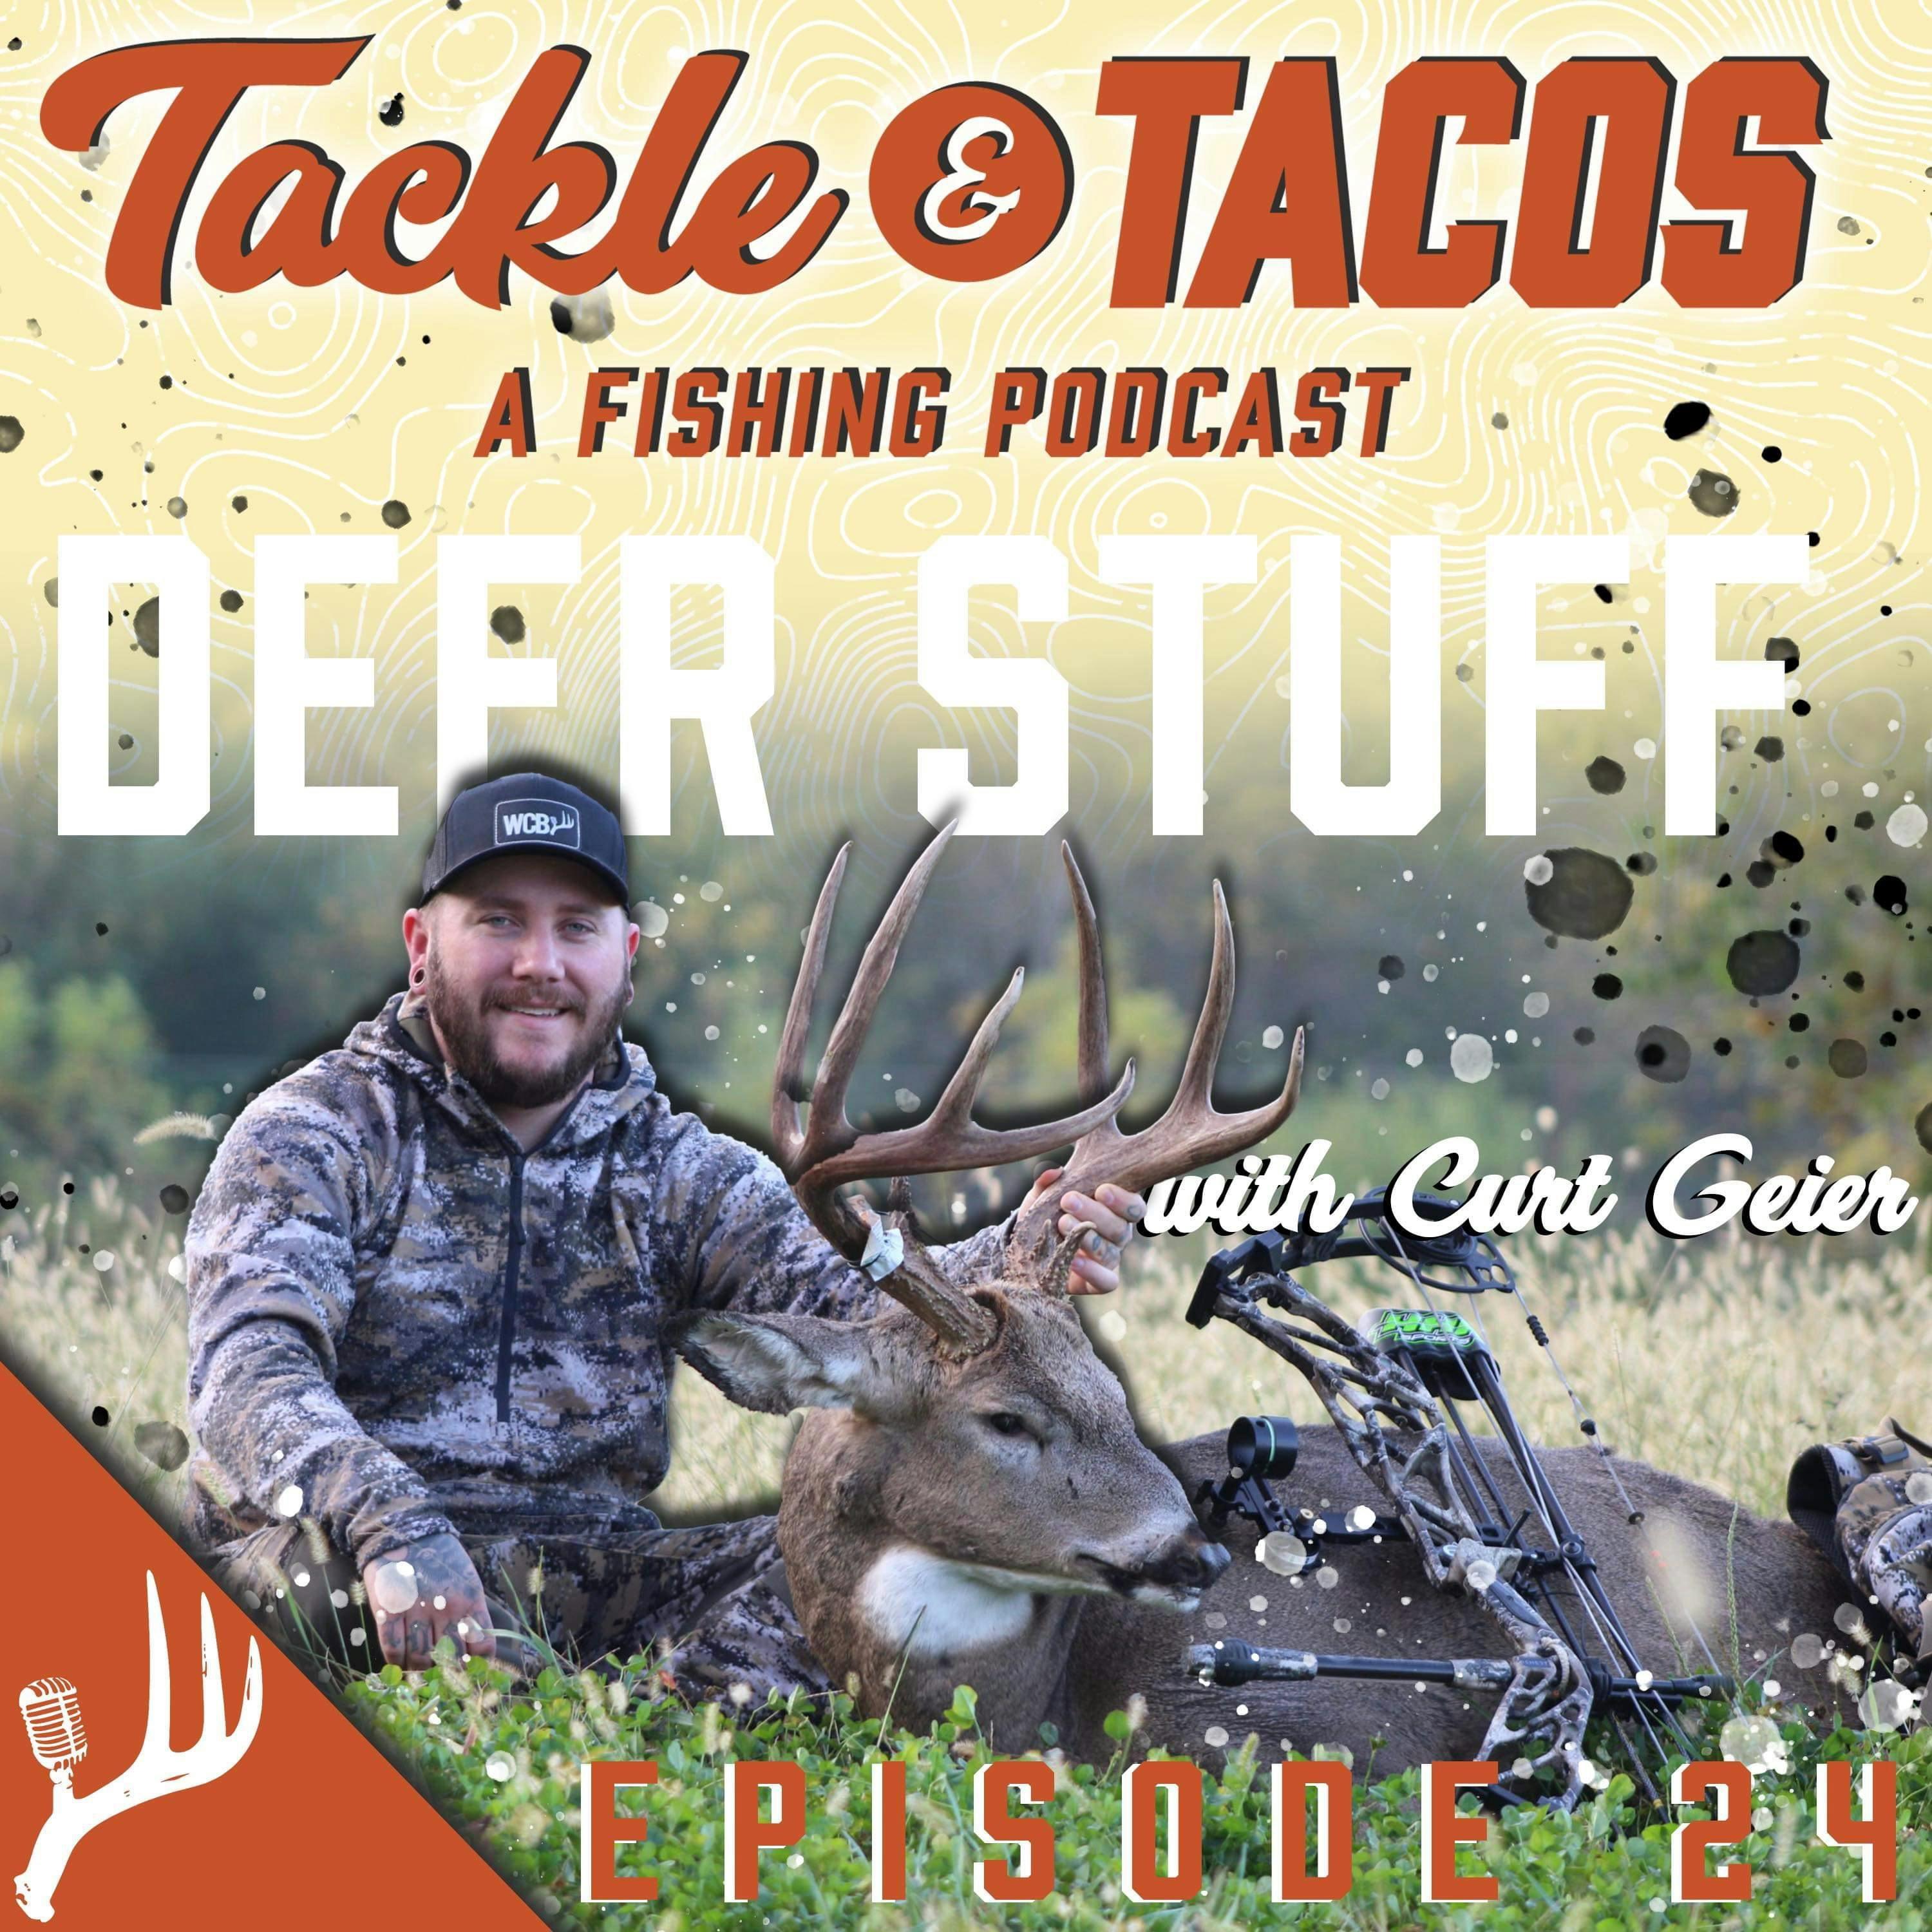 Deer Stuff #1 with Curt Geier - Tackle and Tacos - A Fishing Podcast